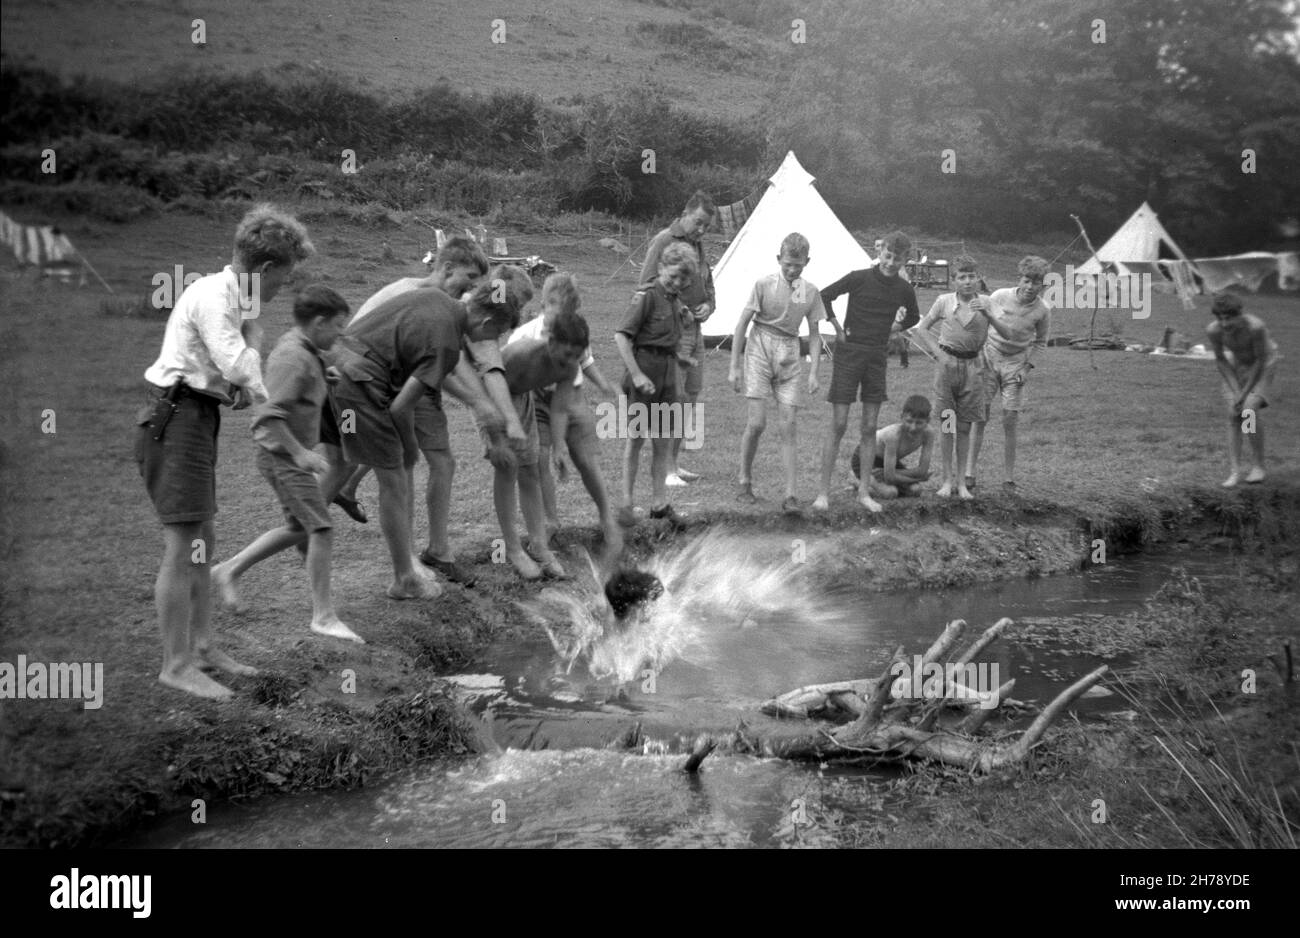 1939, historical, summer scout camp, Ringmore, Devon, England, UK, outside in a field watched by other cub scouts, a boy making a splash as he takes a dip in the stream. Stock Photo